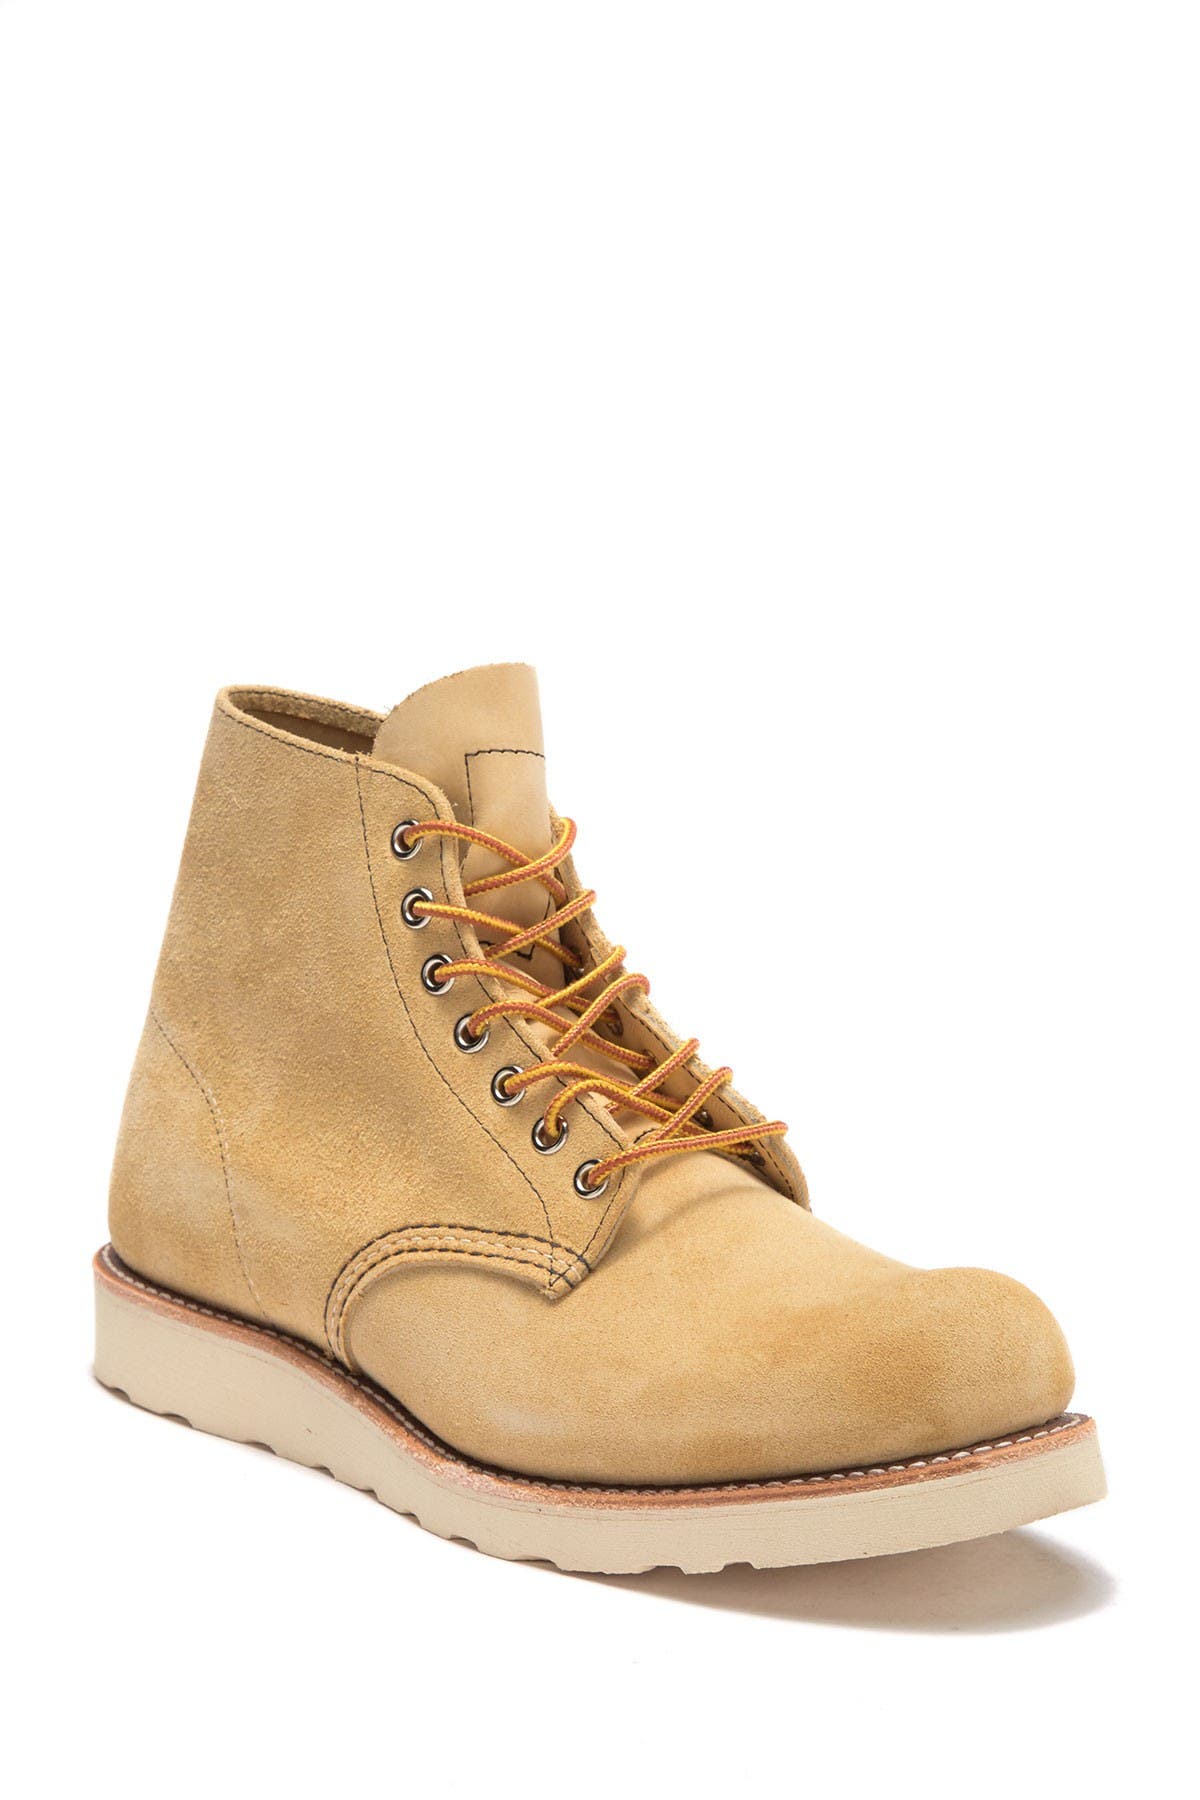 red wing boots round toe